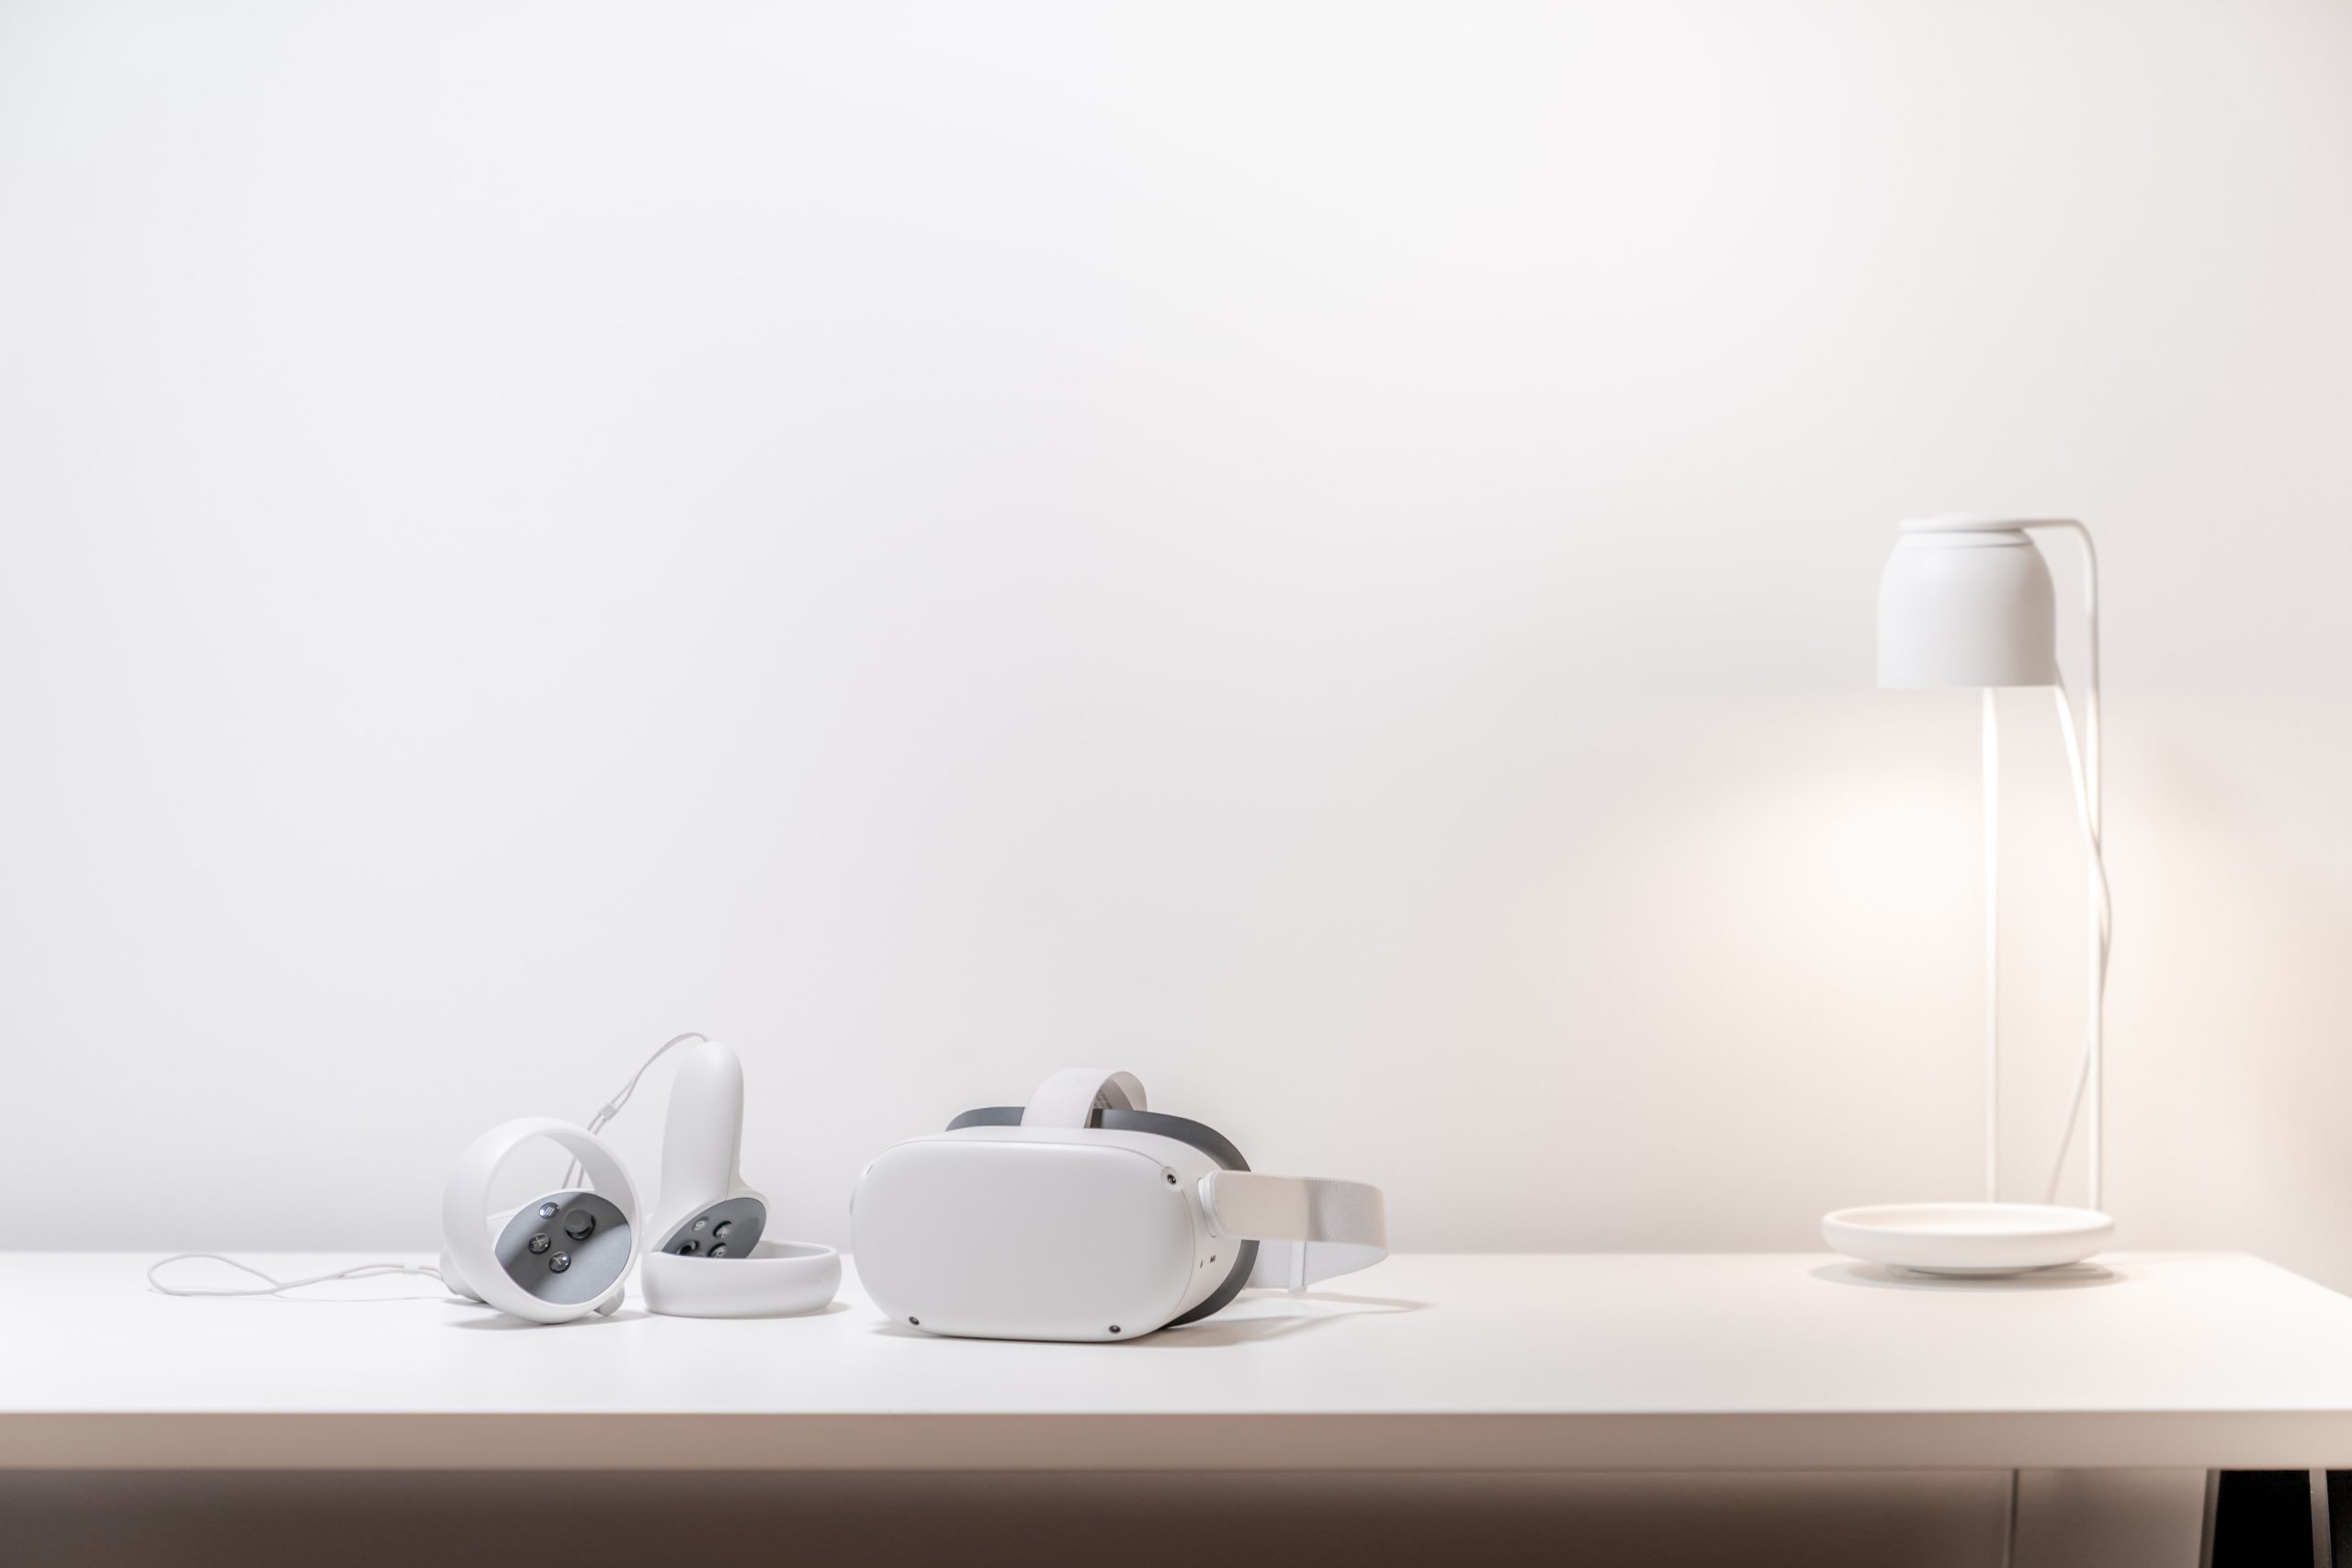 Vr headsets and a lamp on a white table.